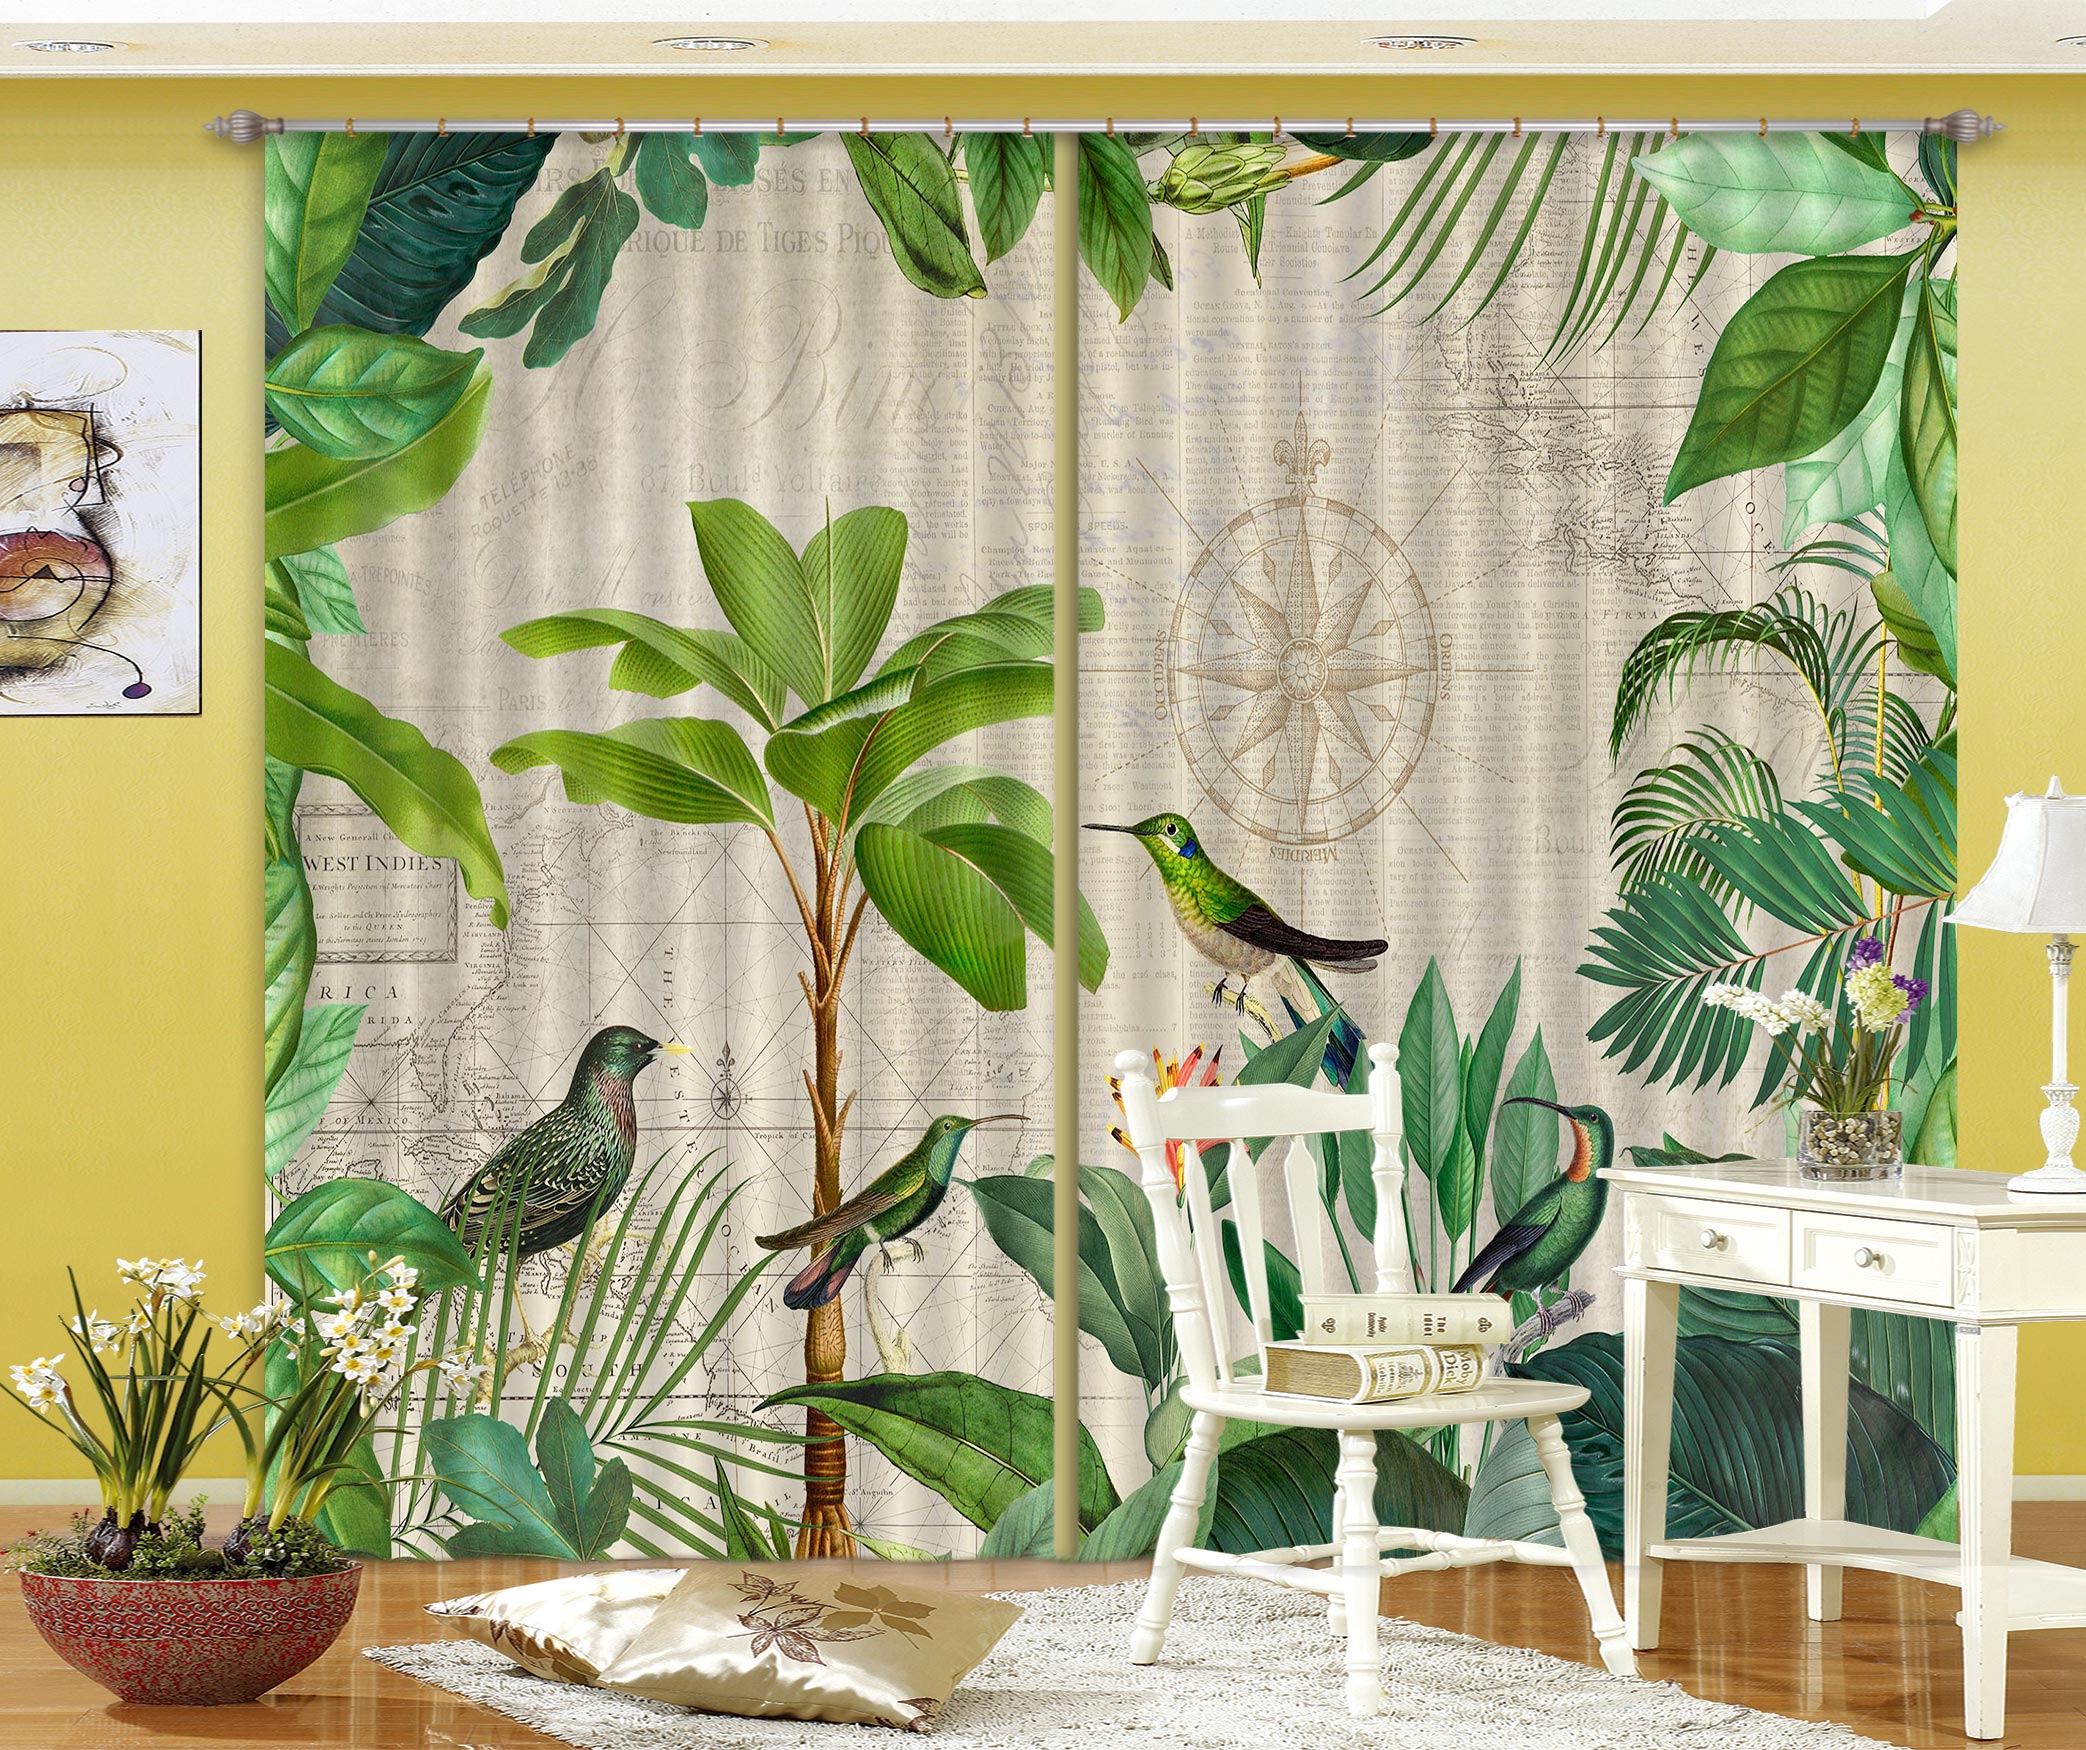 3D Kingfisher Palm 020 Andrea haase Curtain Curtains Drapes